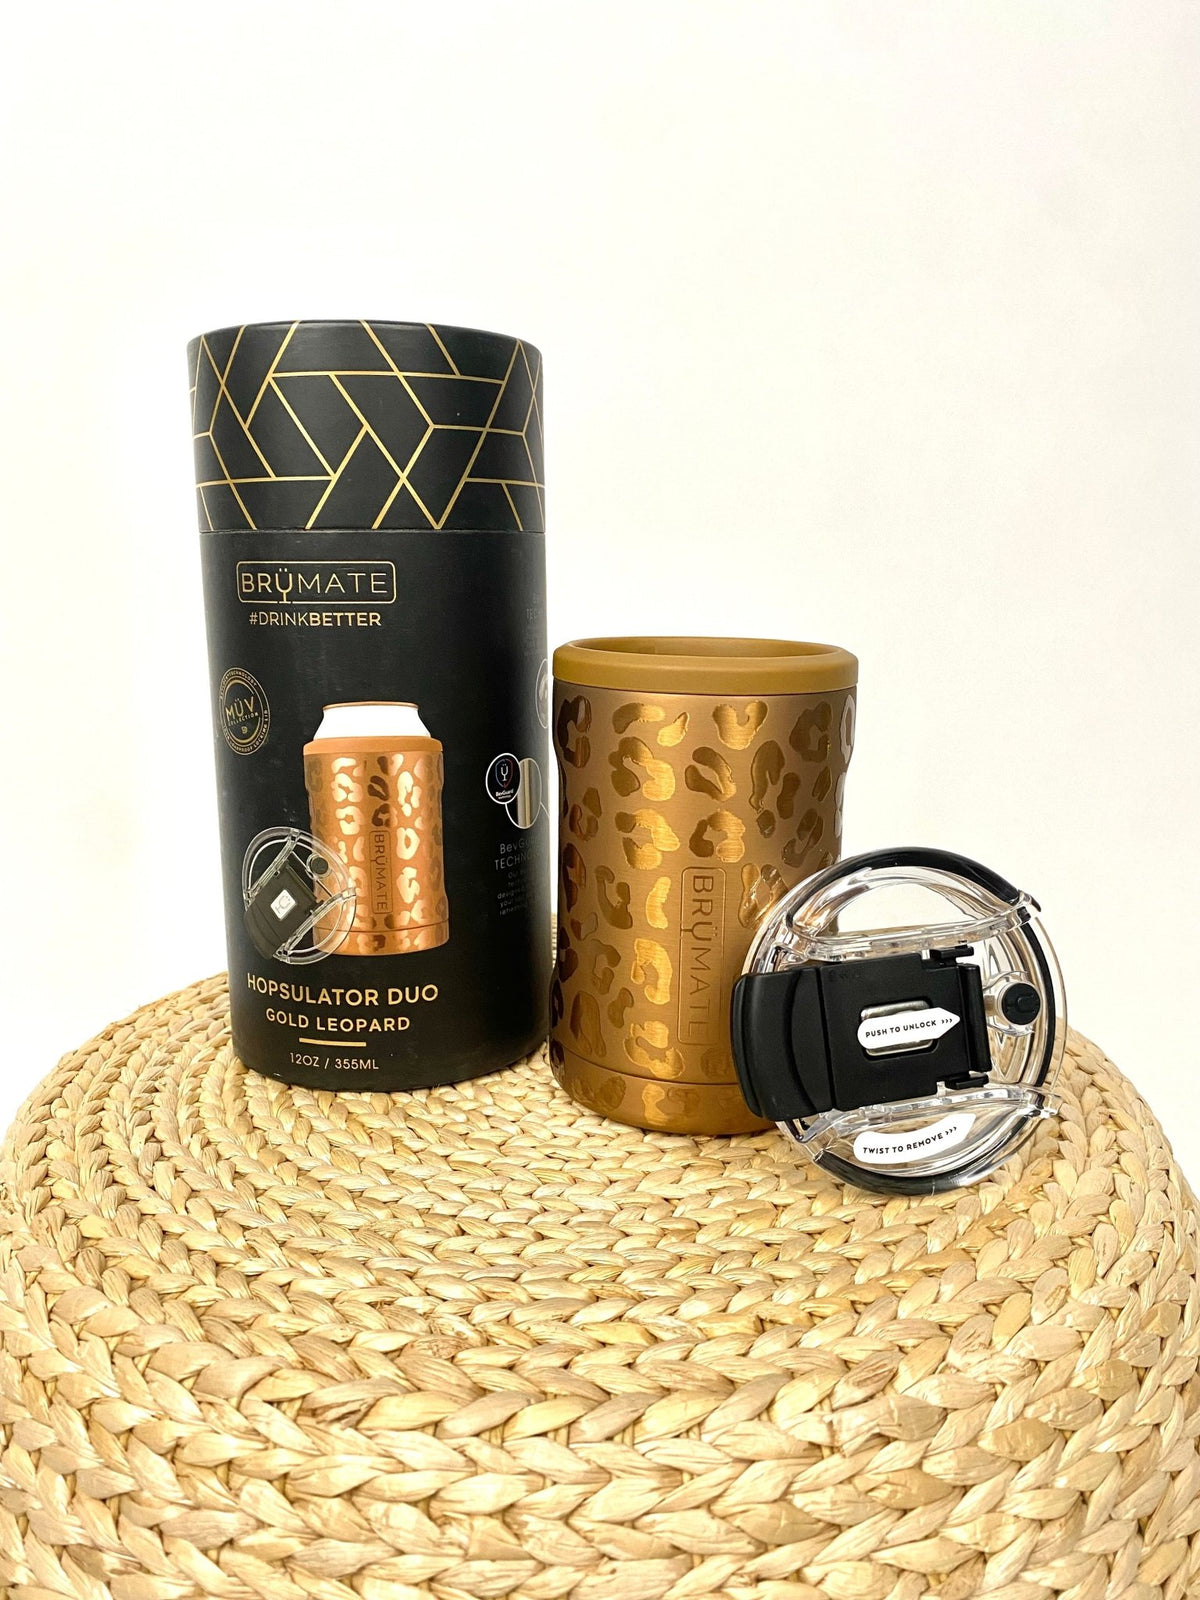 BruMate hopsulator DUO 2 in 1 gold leopard - BruMate Drinkware, Tumblers and Insulated Can Coolers at Lush Fashion Lounge Trendy Boutique in Oklahoma City